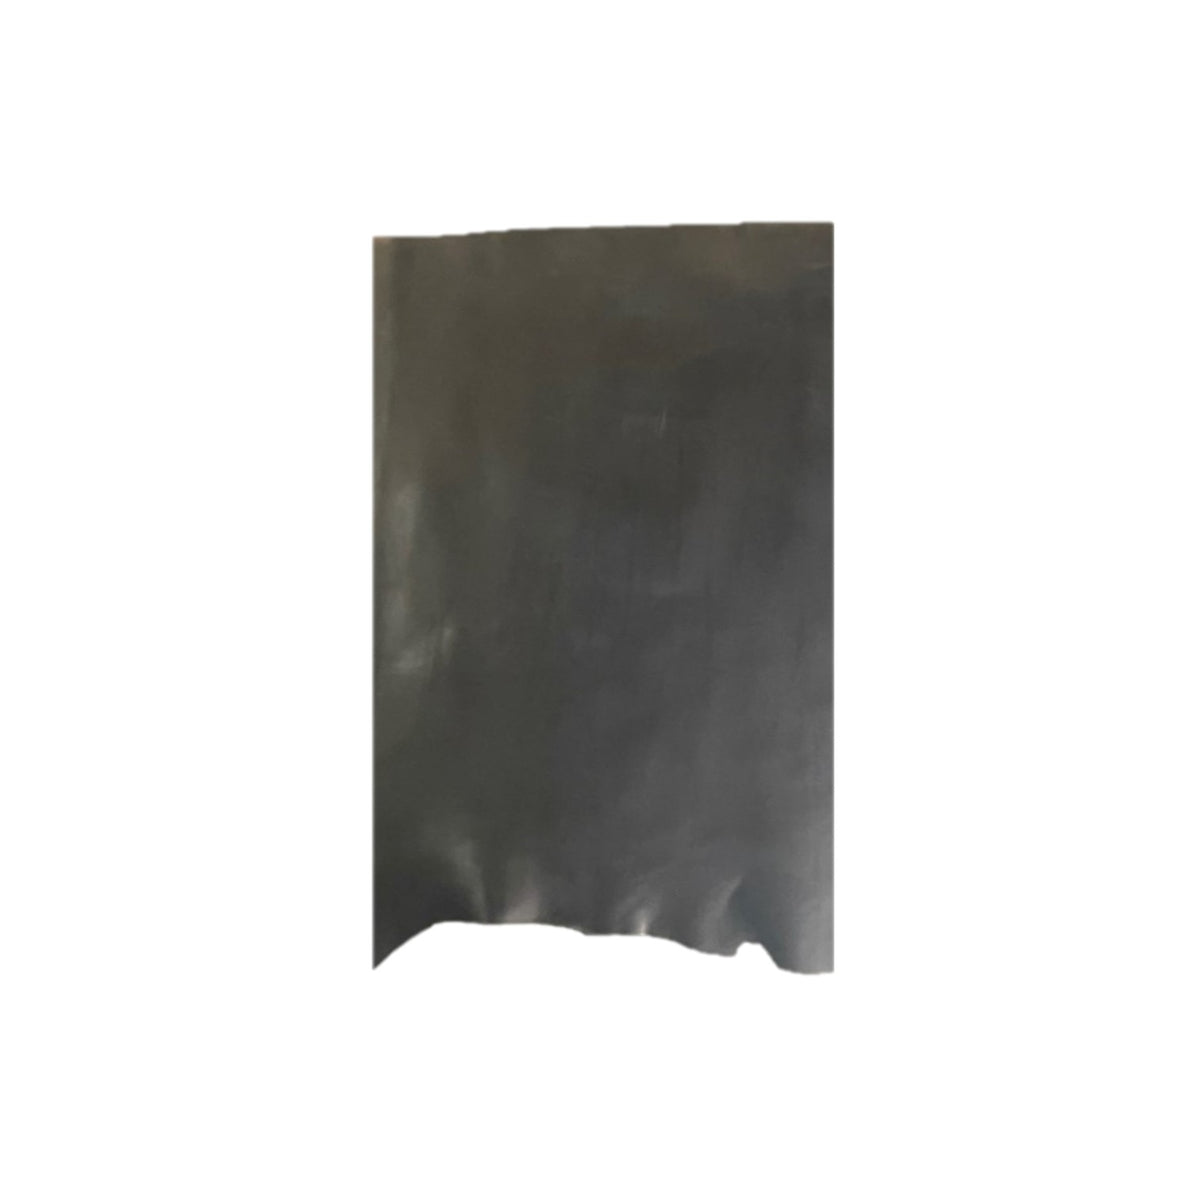 Diego Remnant | Black | 2.0mm | 5 - 7 sq.ft | From $65 - $95 ea.